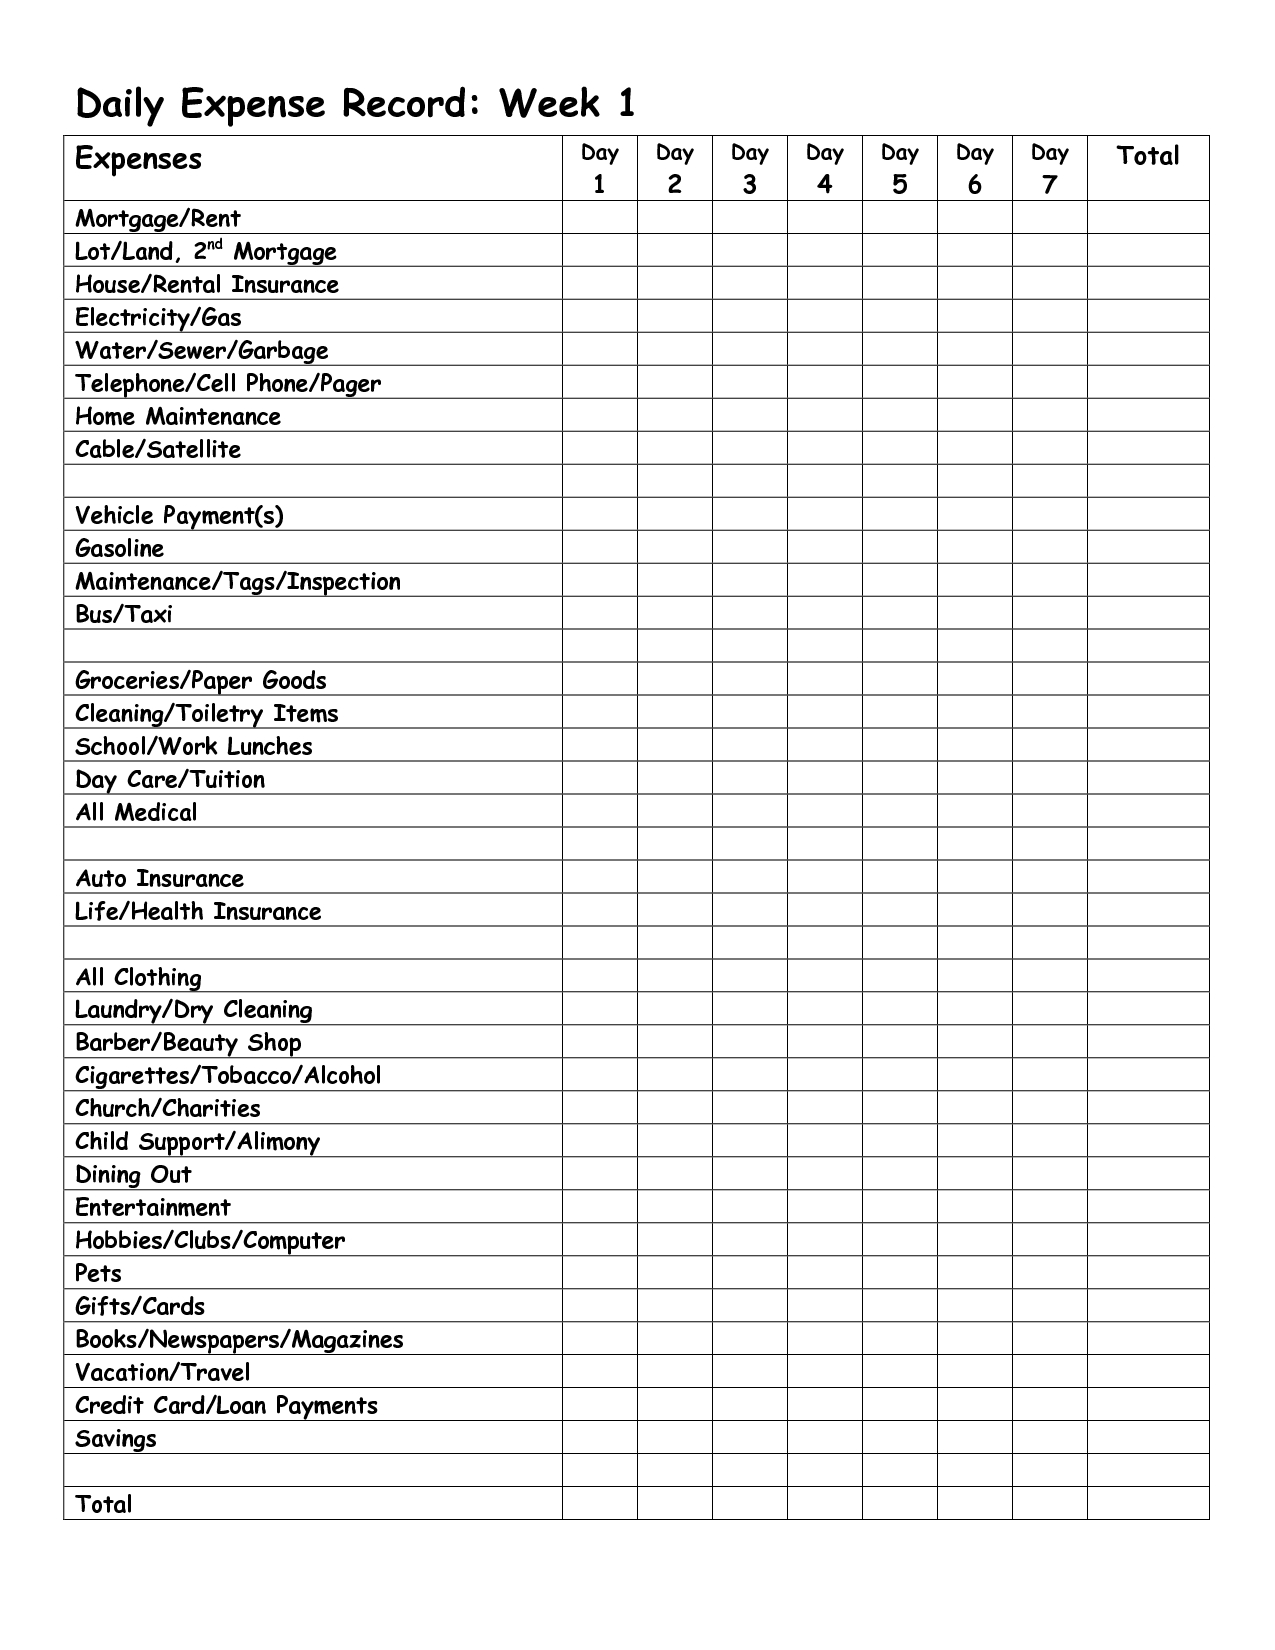 Monthly Expense Report Template | Daily Expense Record Week With Regard To Daily Report Sheet Template